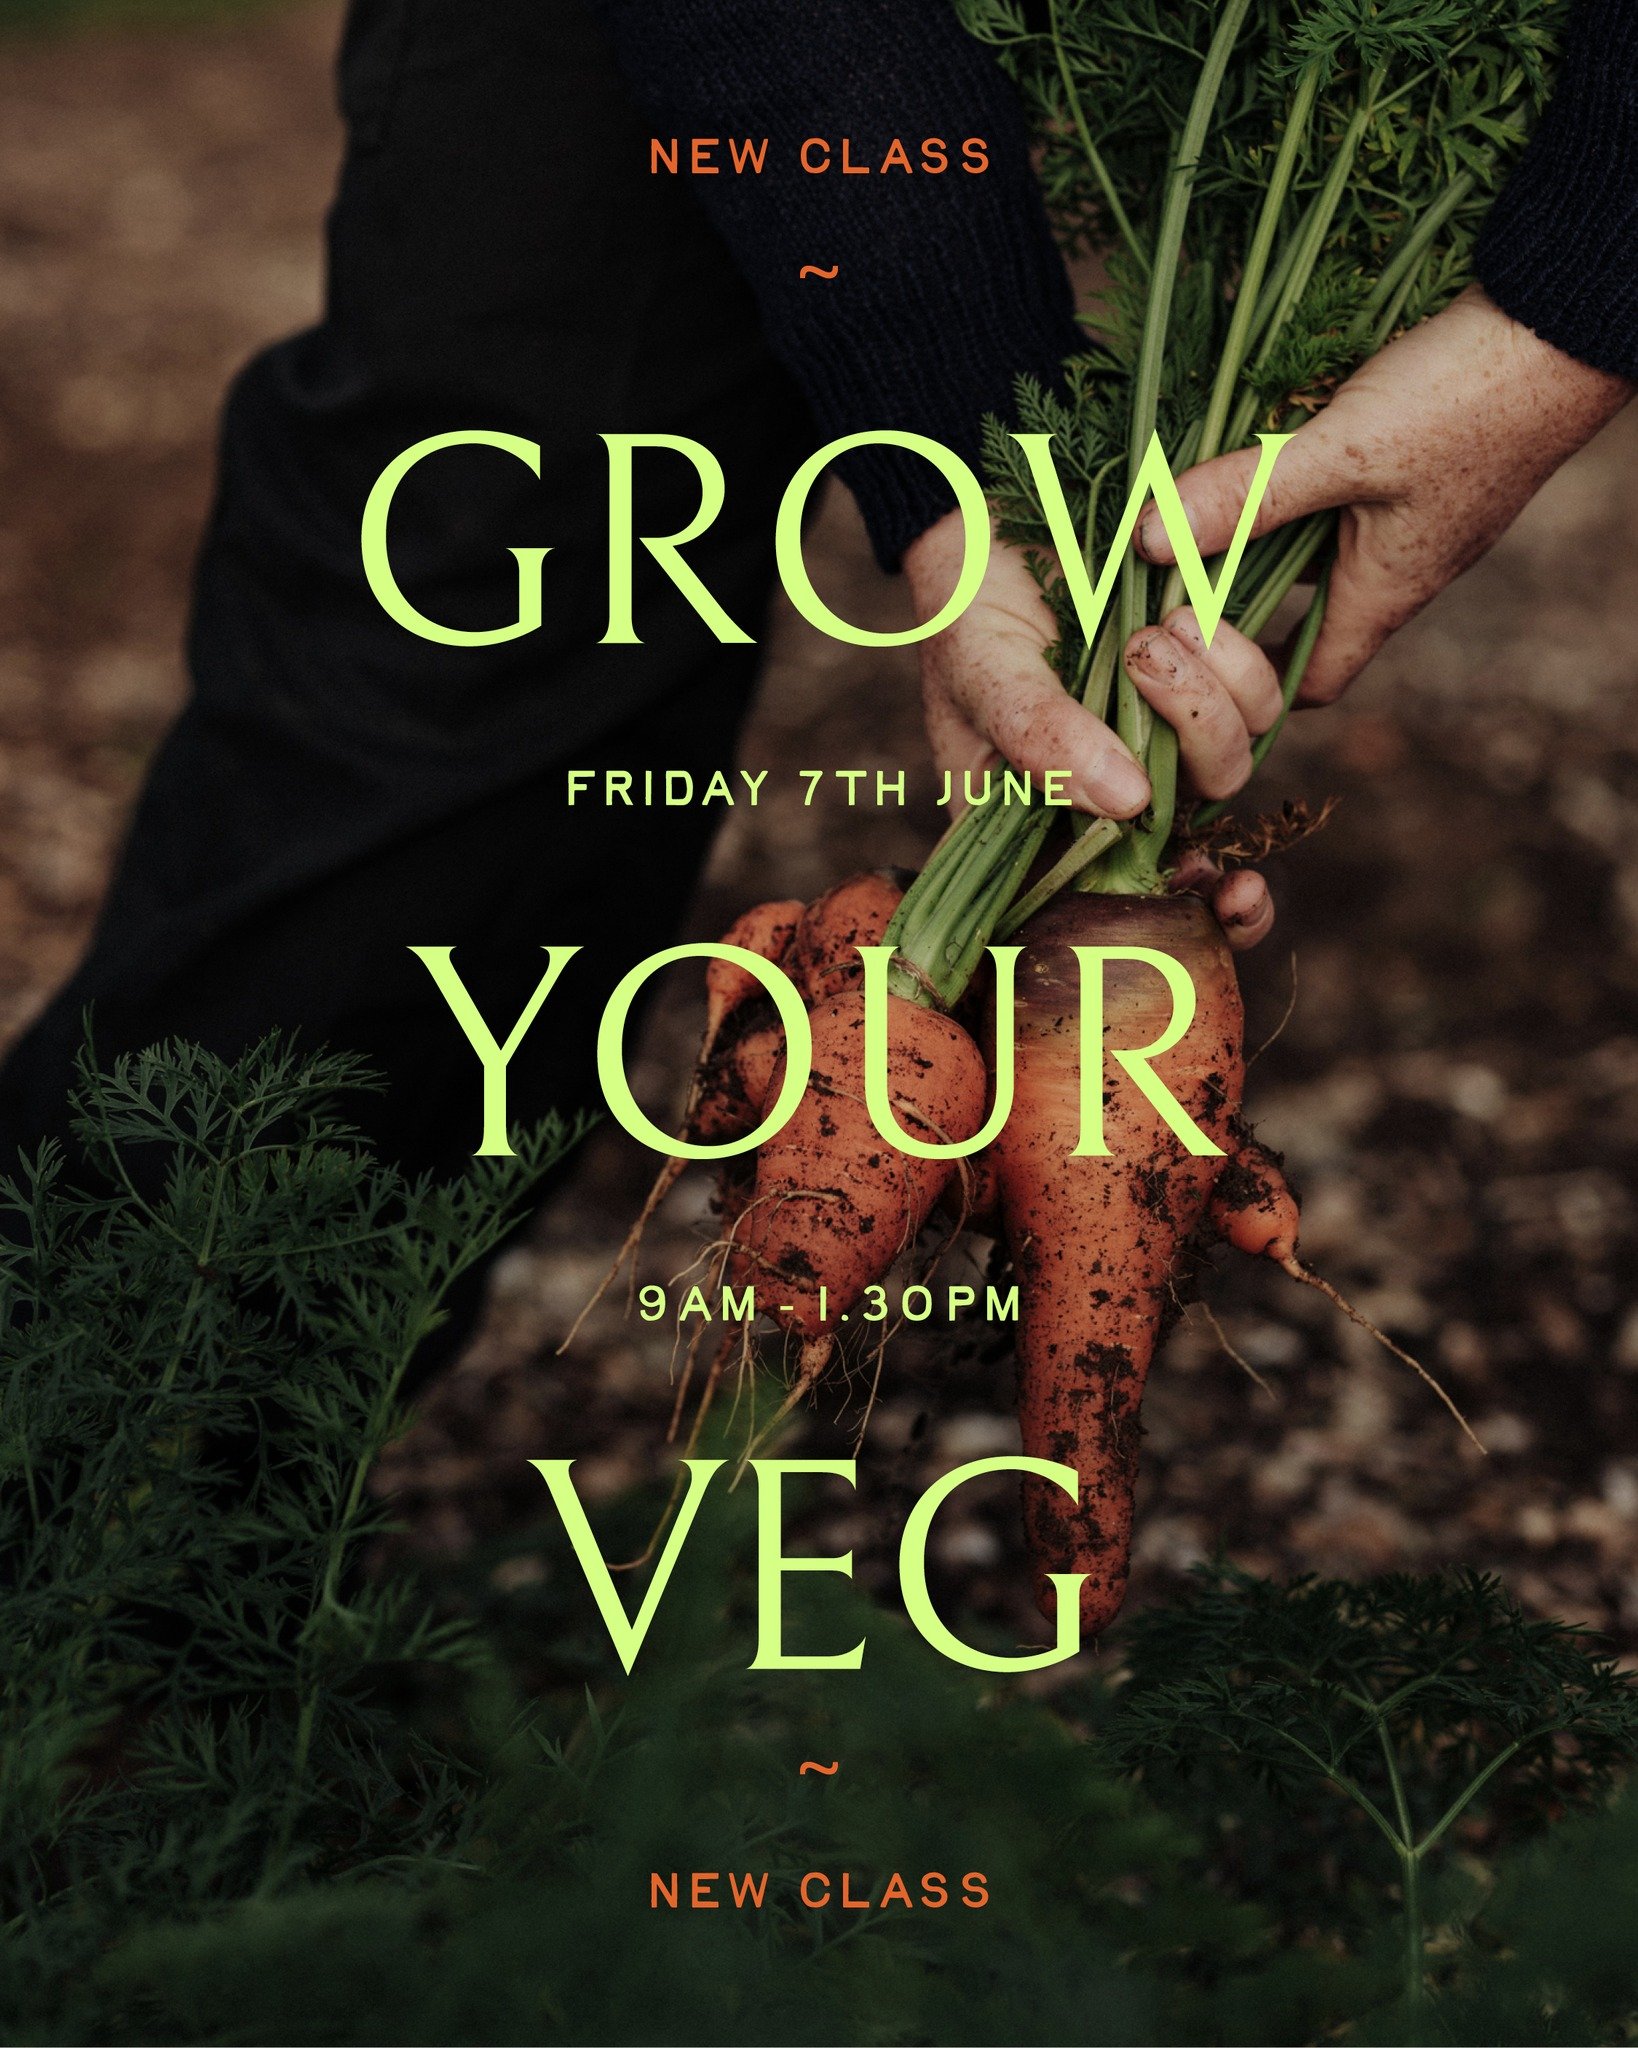 Veg Growing 101

A short half day course showing the basics and benefits of growing your own food in all sorts of spaces. Expect to learn where and how to buy and sow seed, compost, build no dig veg beds, and all sorts of growing tricks to save on sp